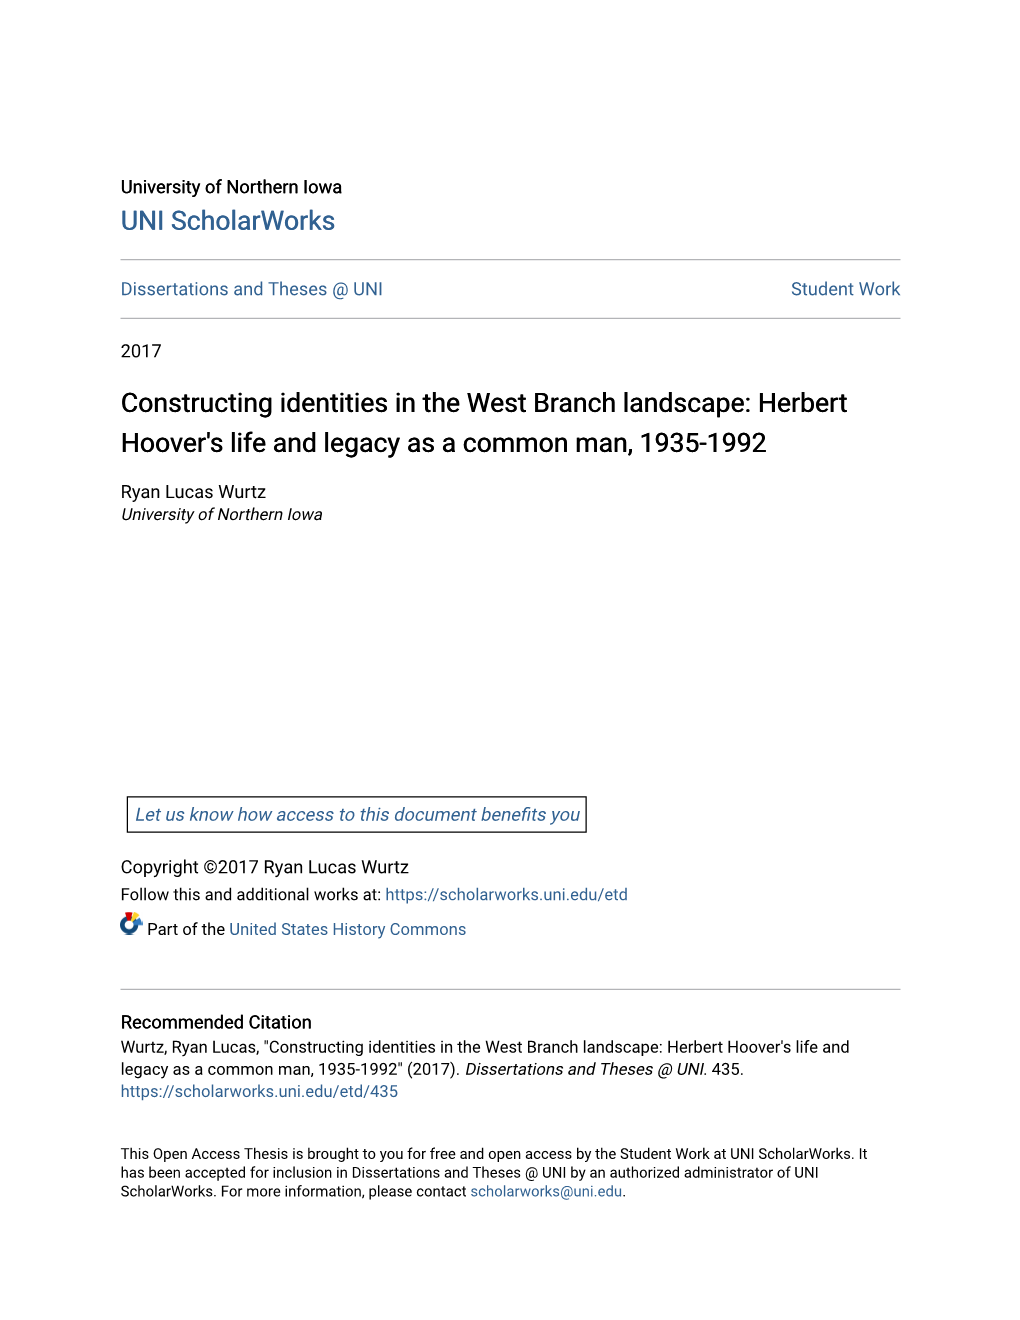 Constructing Identities in the West Branch Landscape: Herbert Hoover's Life and Legacy As a Common Man, 1935-1992